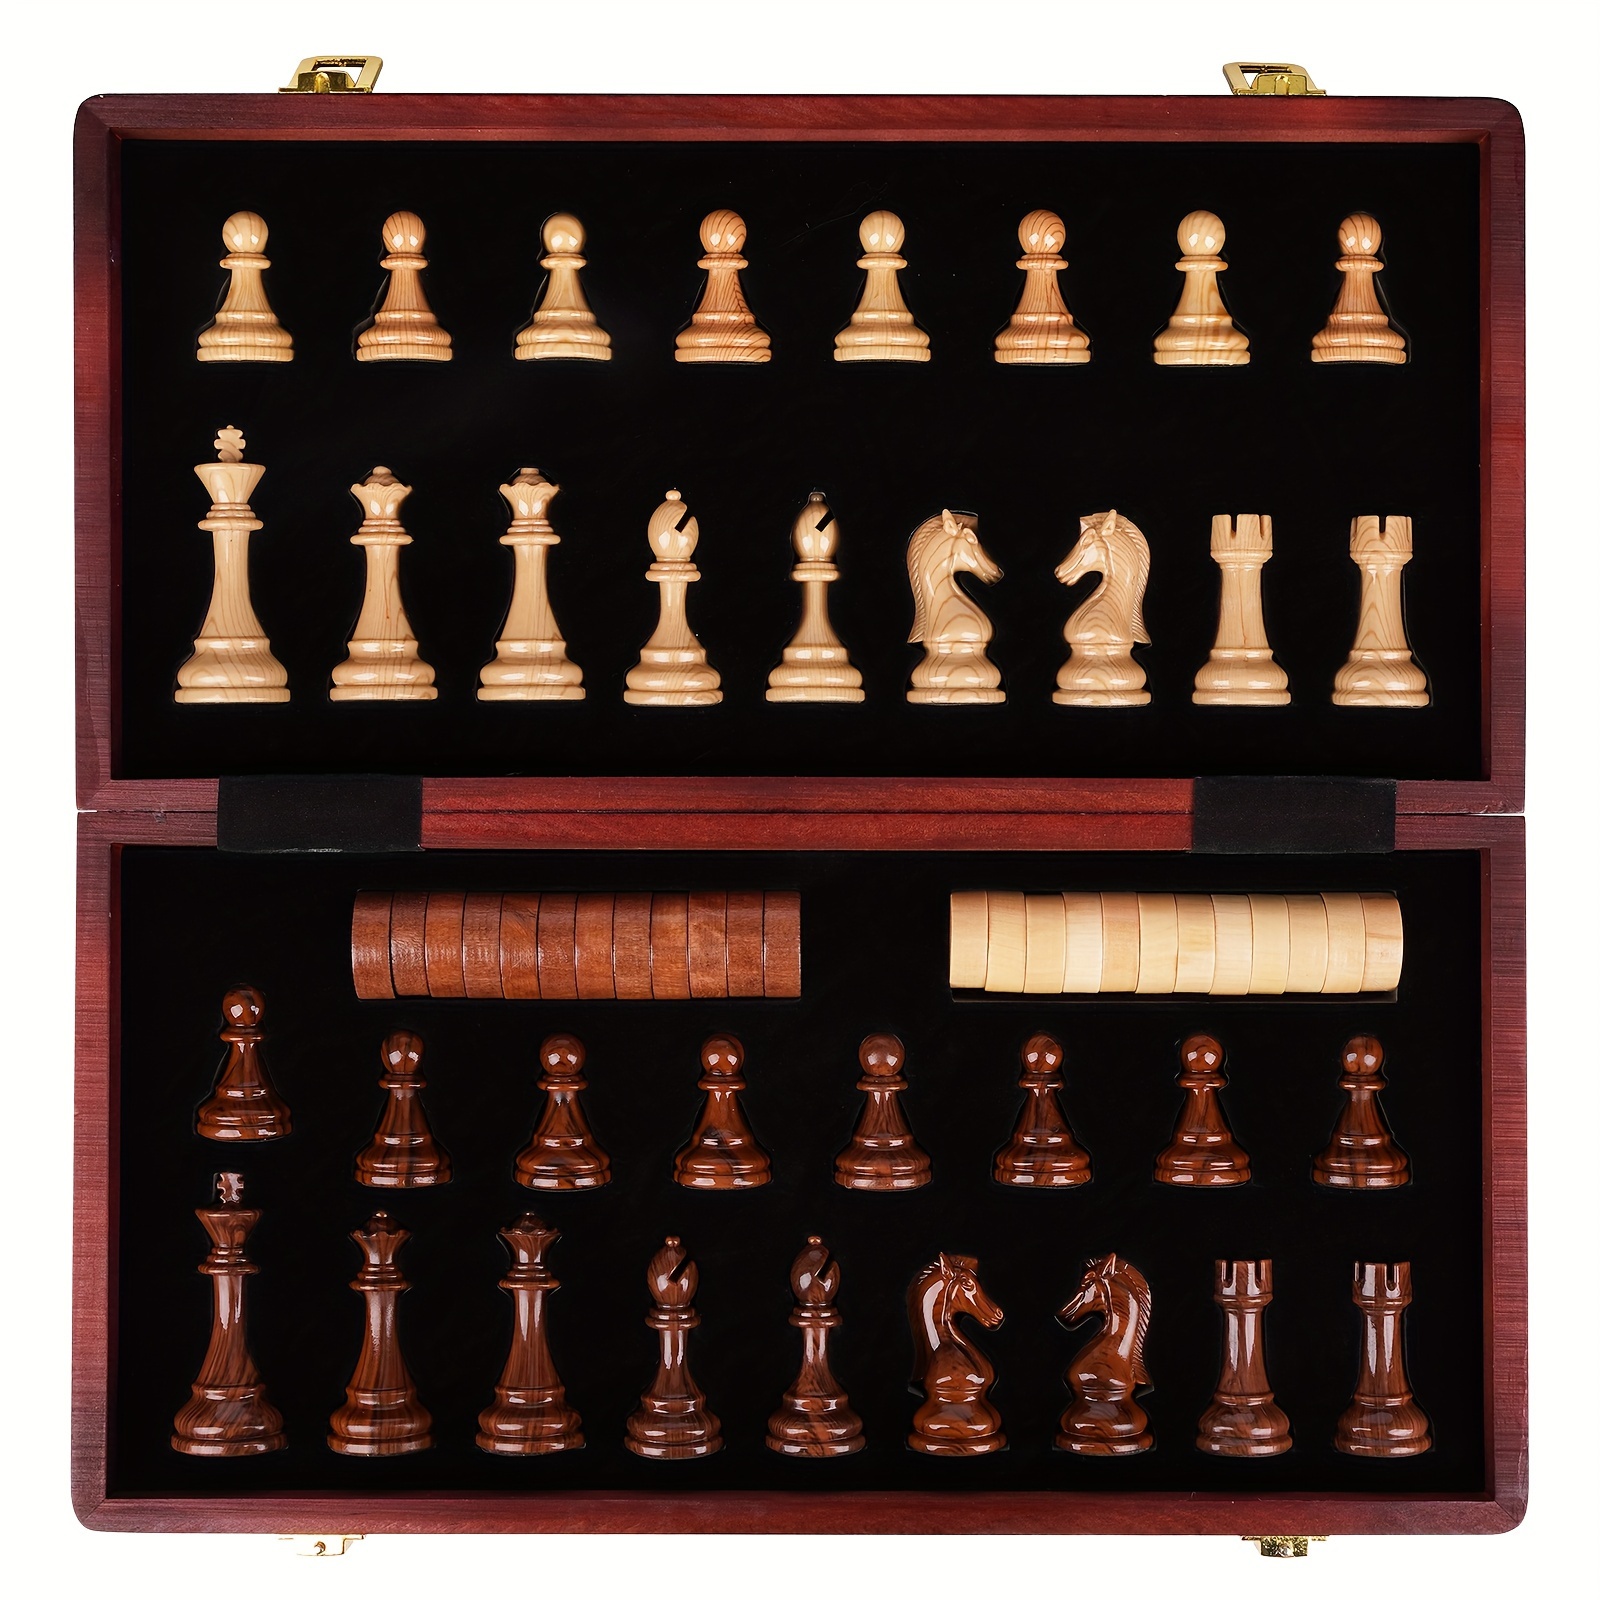 

2 In 1 Acrylic+metal Chess And Set- 15"travel Portable Chess Set For Adults Including 24 Wooden Checkers, Complete Chess Pieces Folding Wooden Chess Board Set - Durable Chess Sets